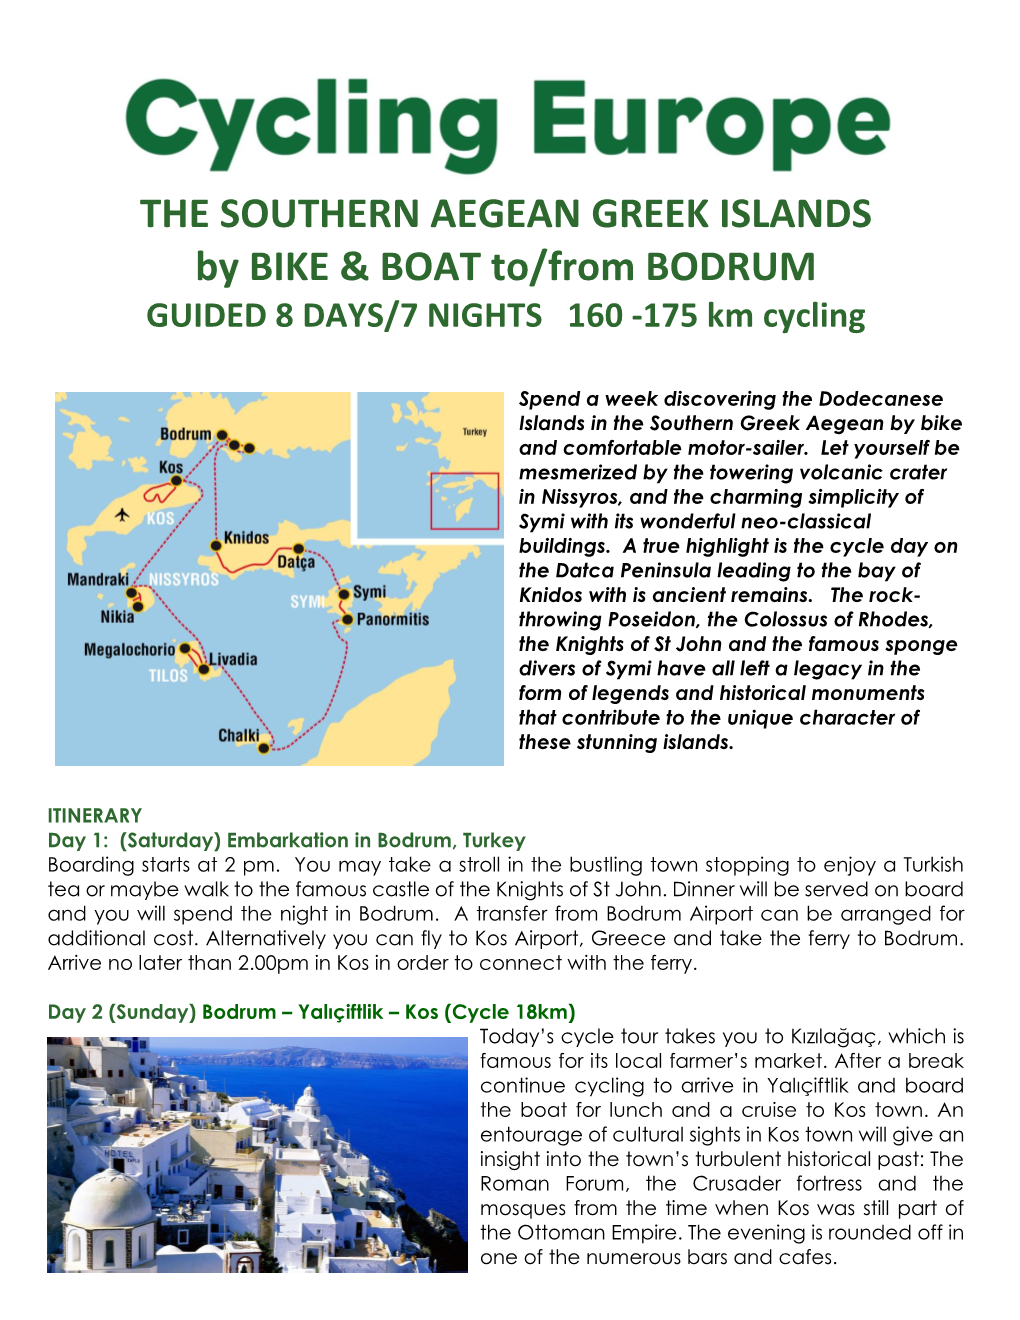 THE SOUTHERN AEGEAN GREEK ISLANDS by BIKE & BOAT To/From